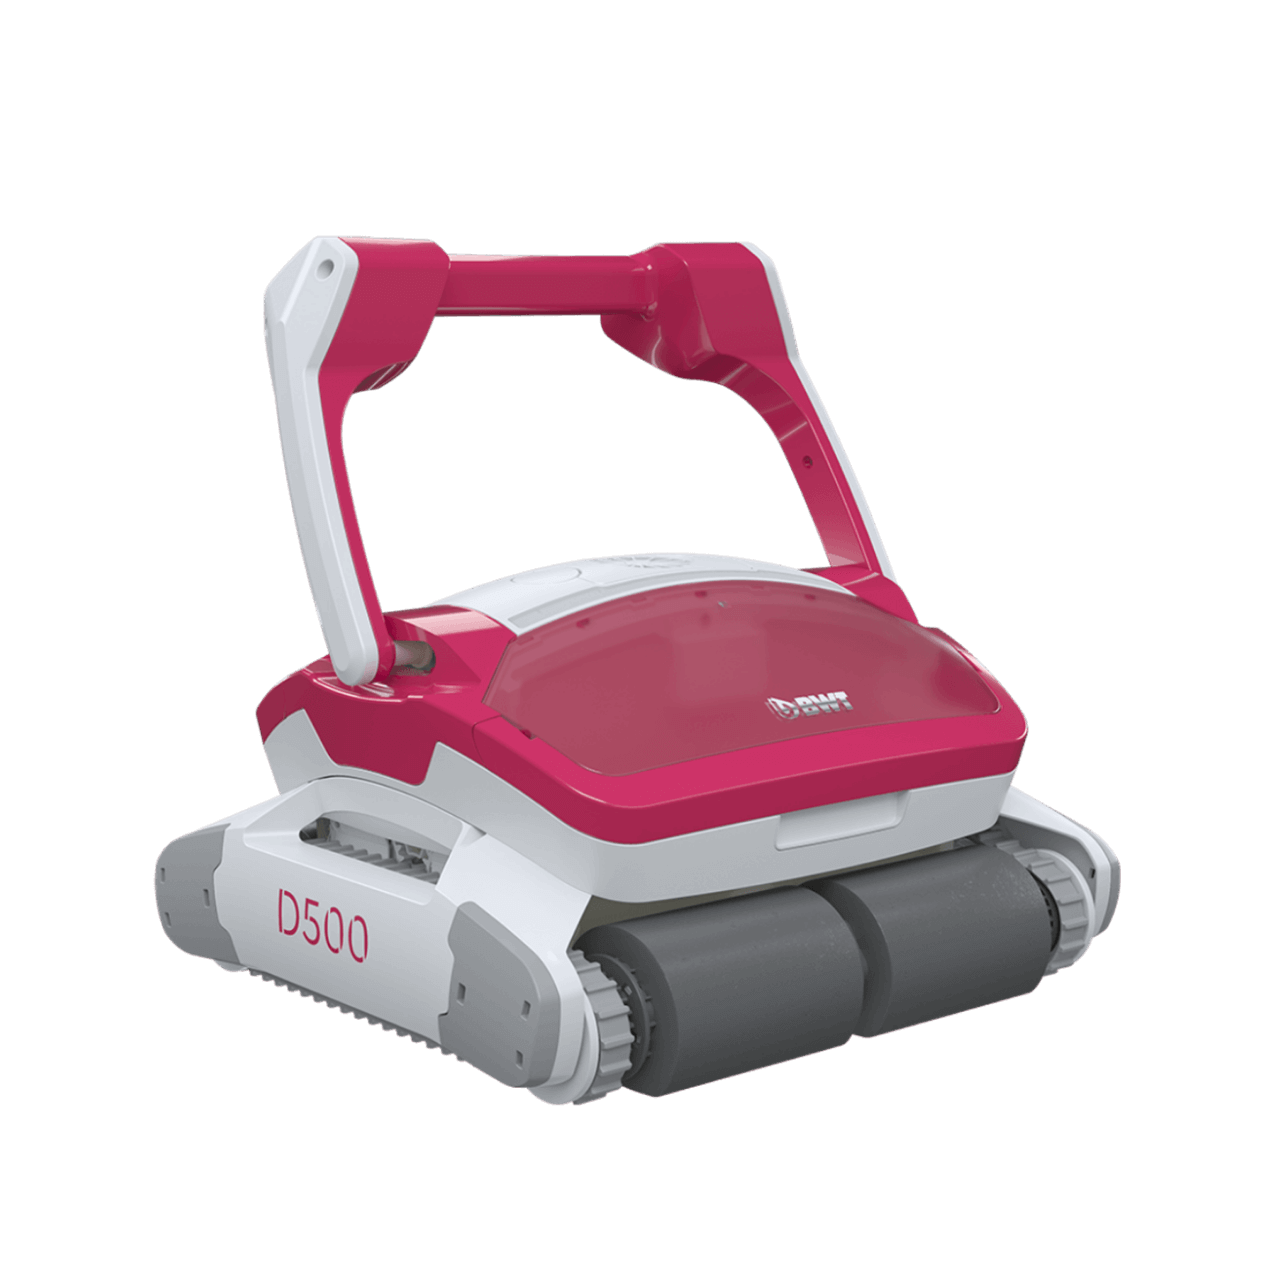 BWT D500 pool robot for cleaning the floor, wall and waterline of the swimming pool.